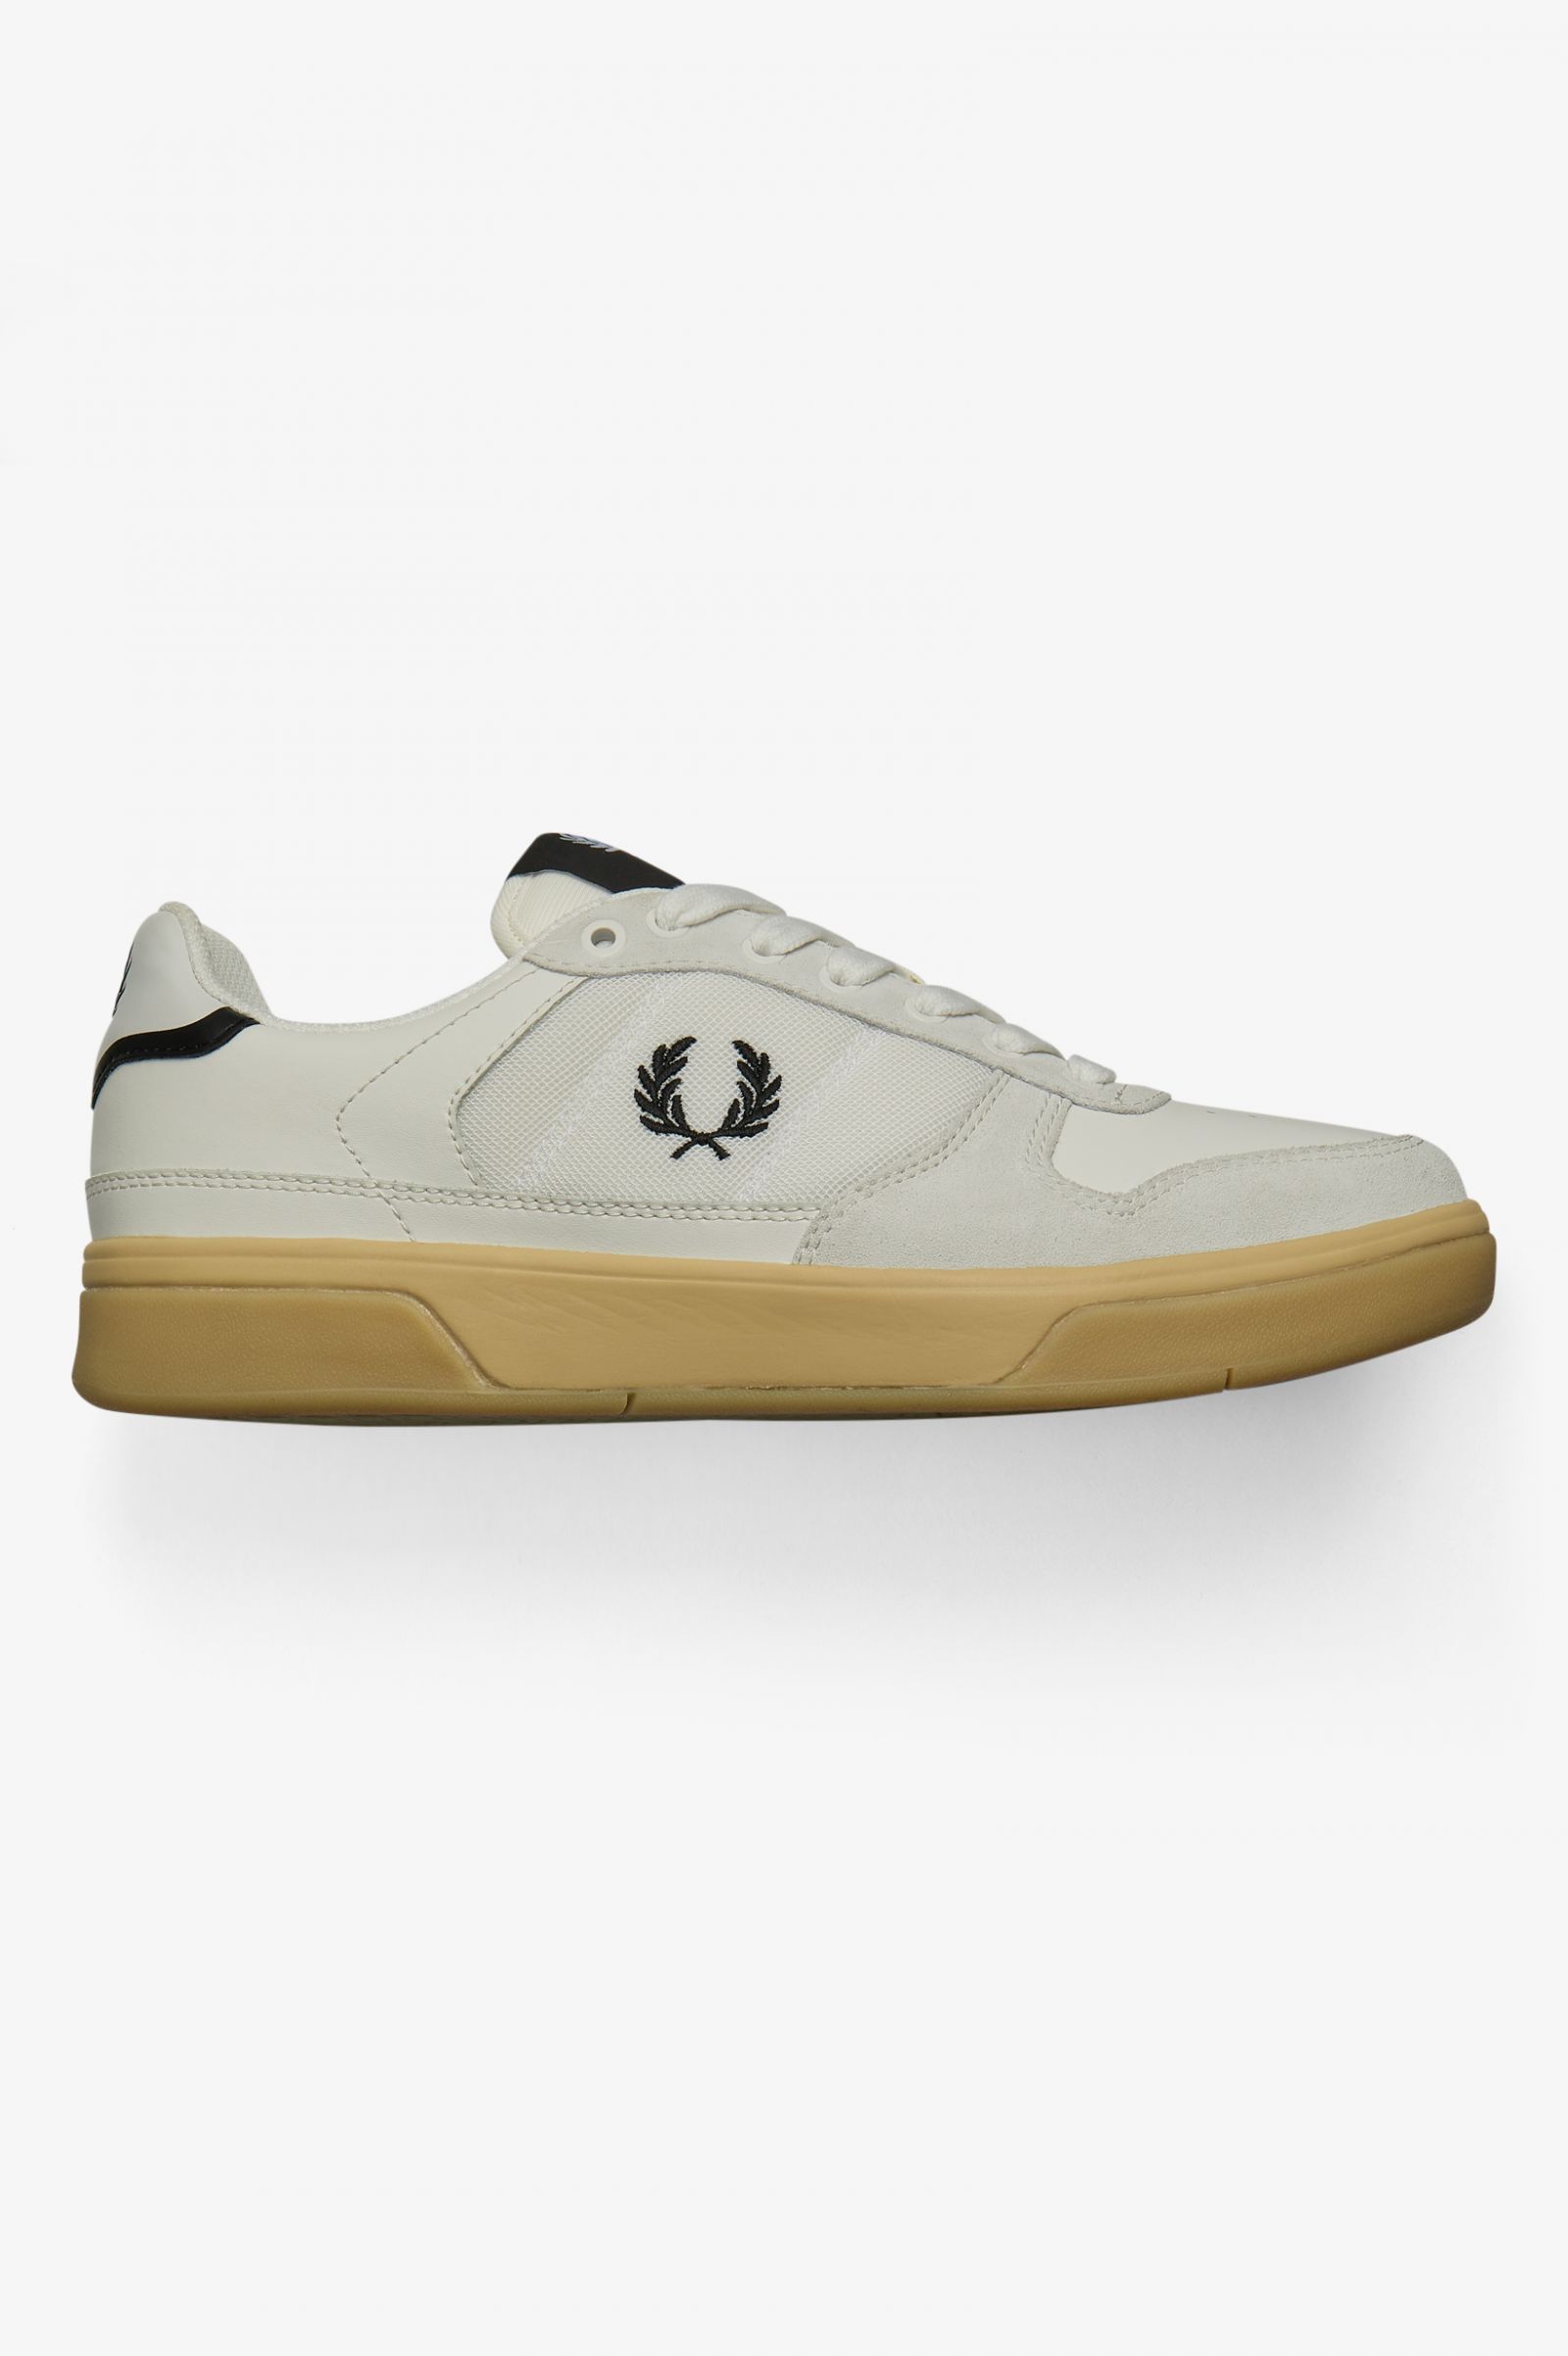 fred perry suede shoes